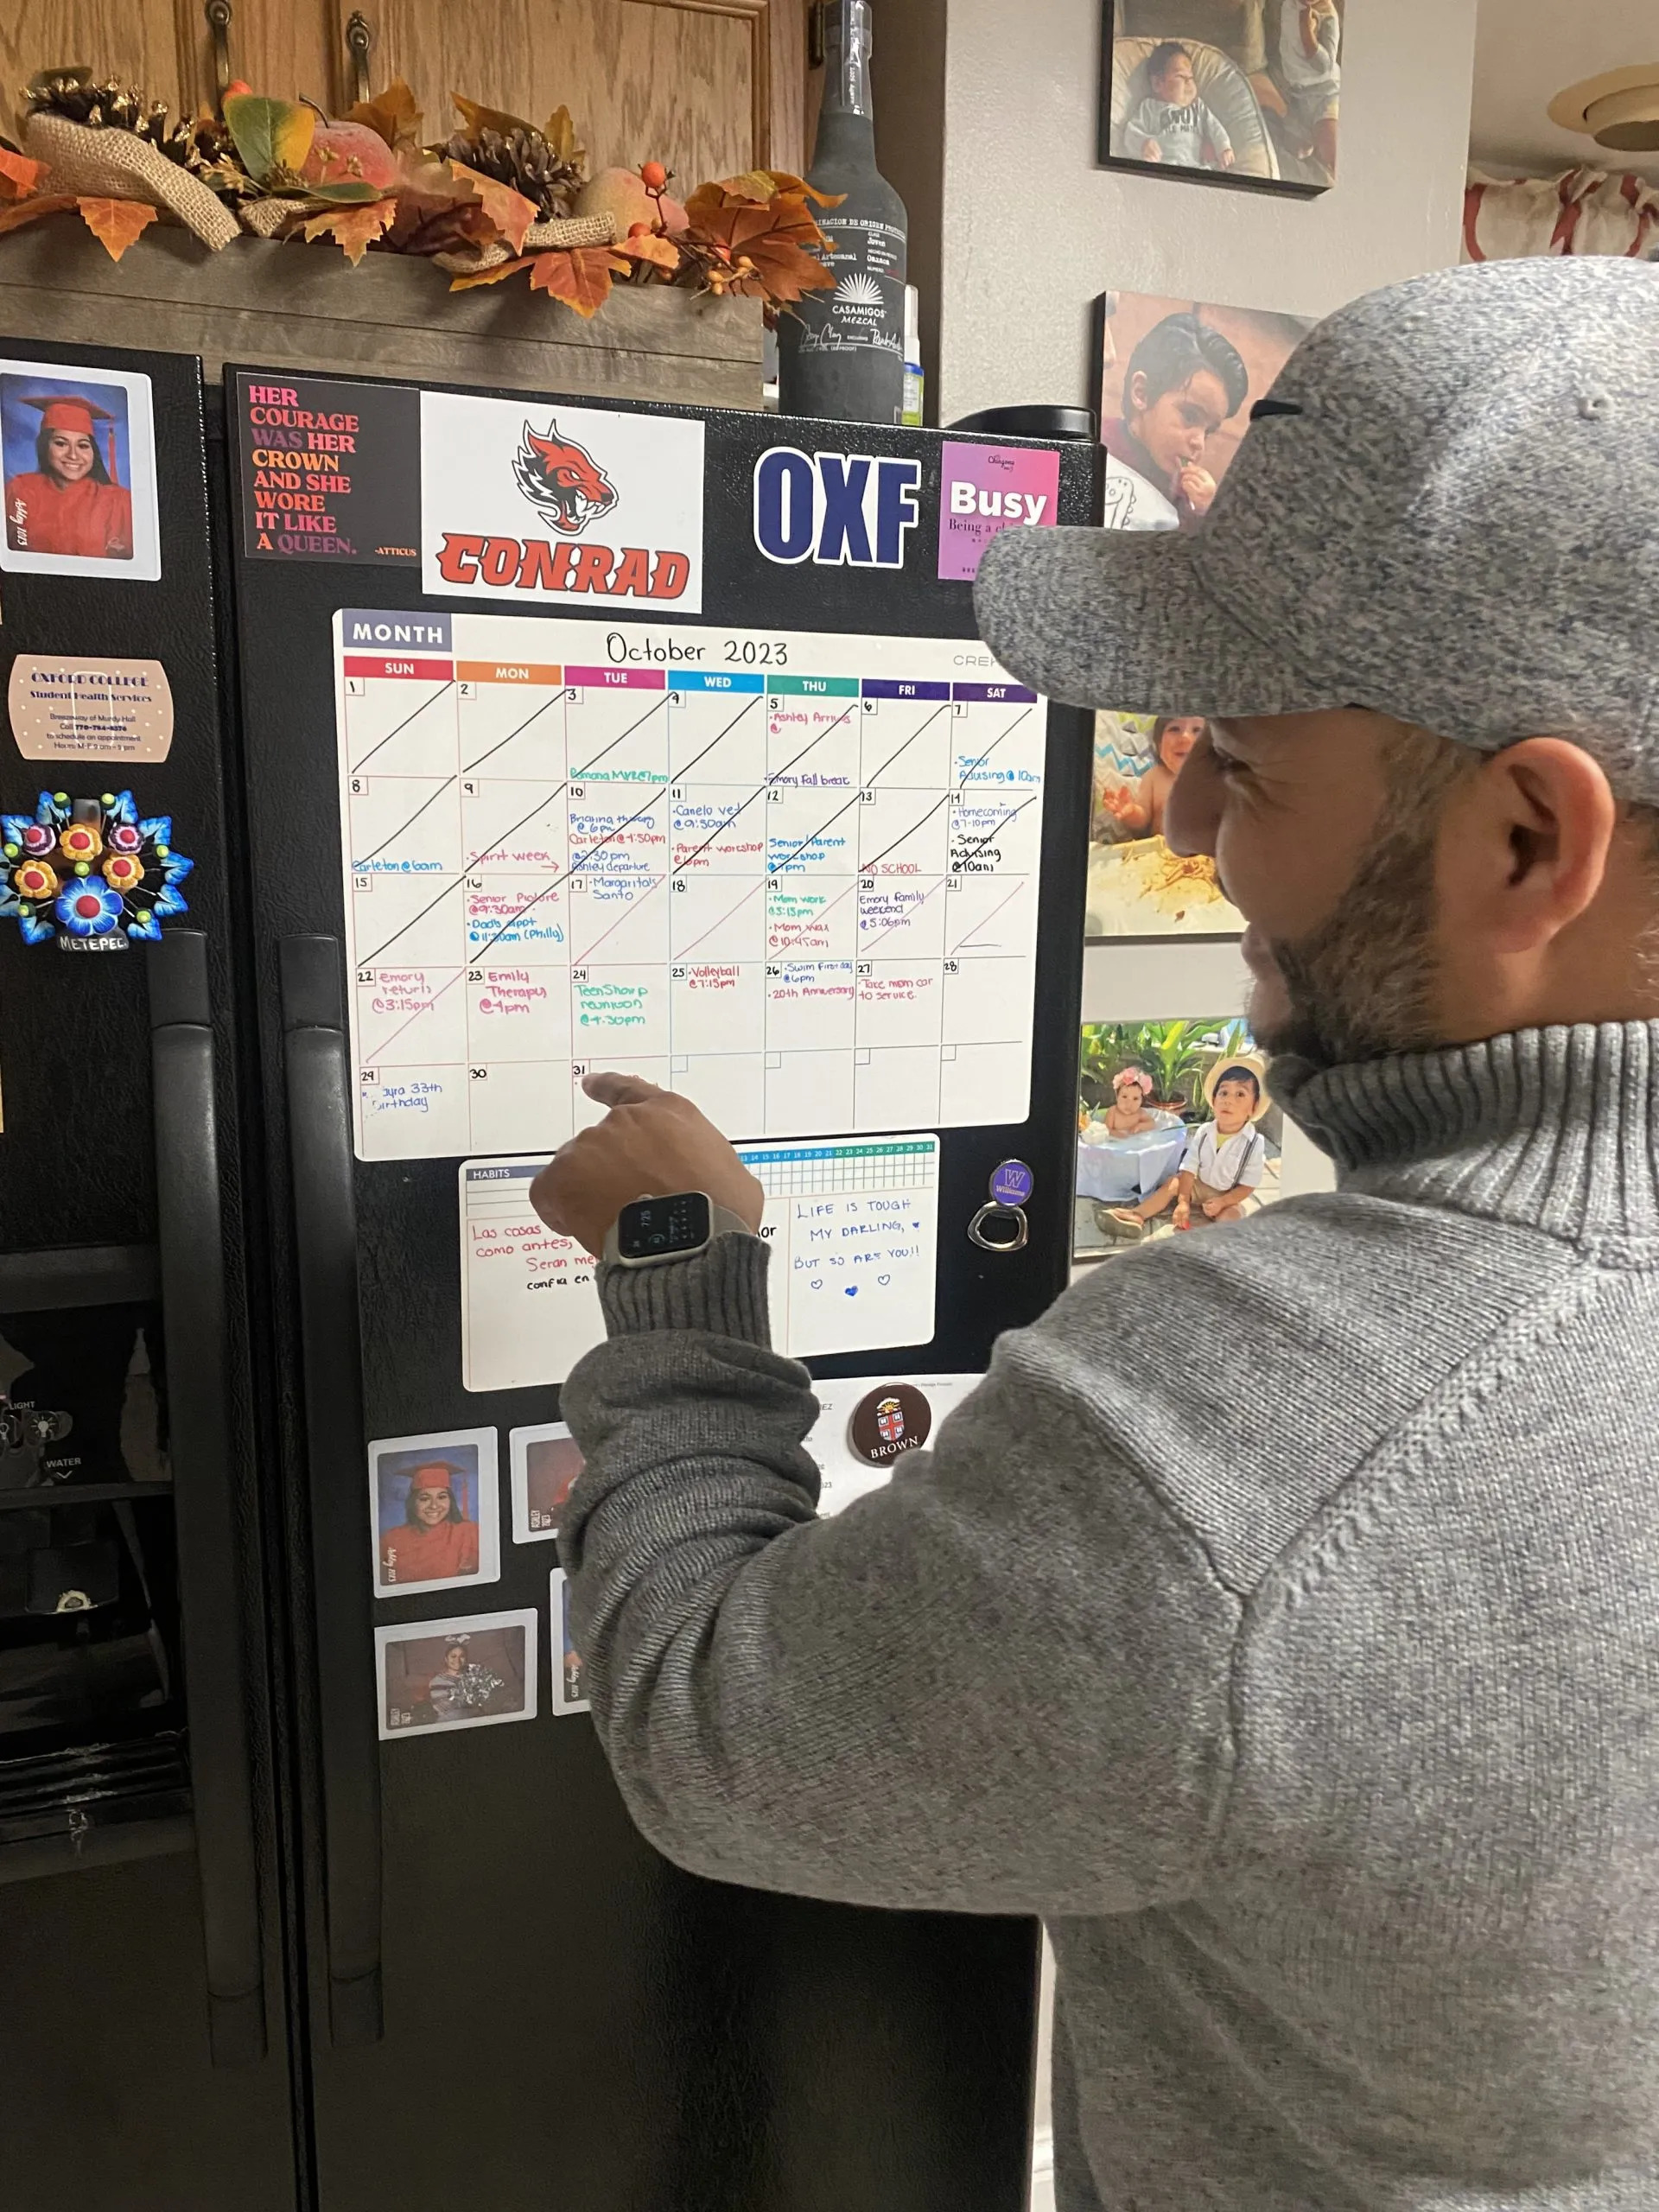 Closeup of man in profile with baseball cap and gray sweatshirt standing in front of black refrigerator pointing to a large family calendar surrounded by photos of family and stickers on the refrigerator